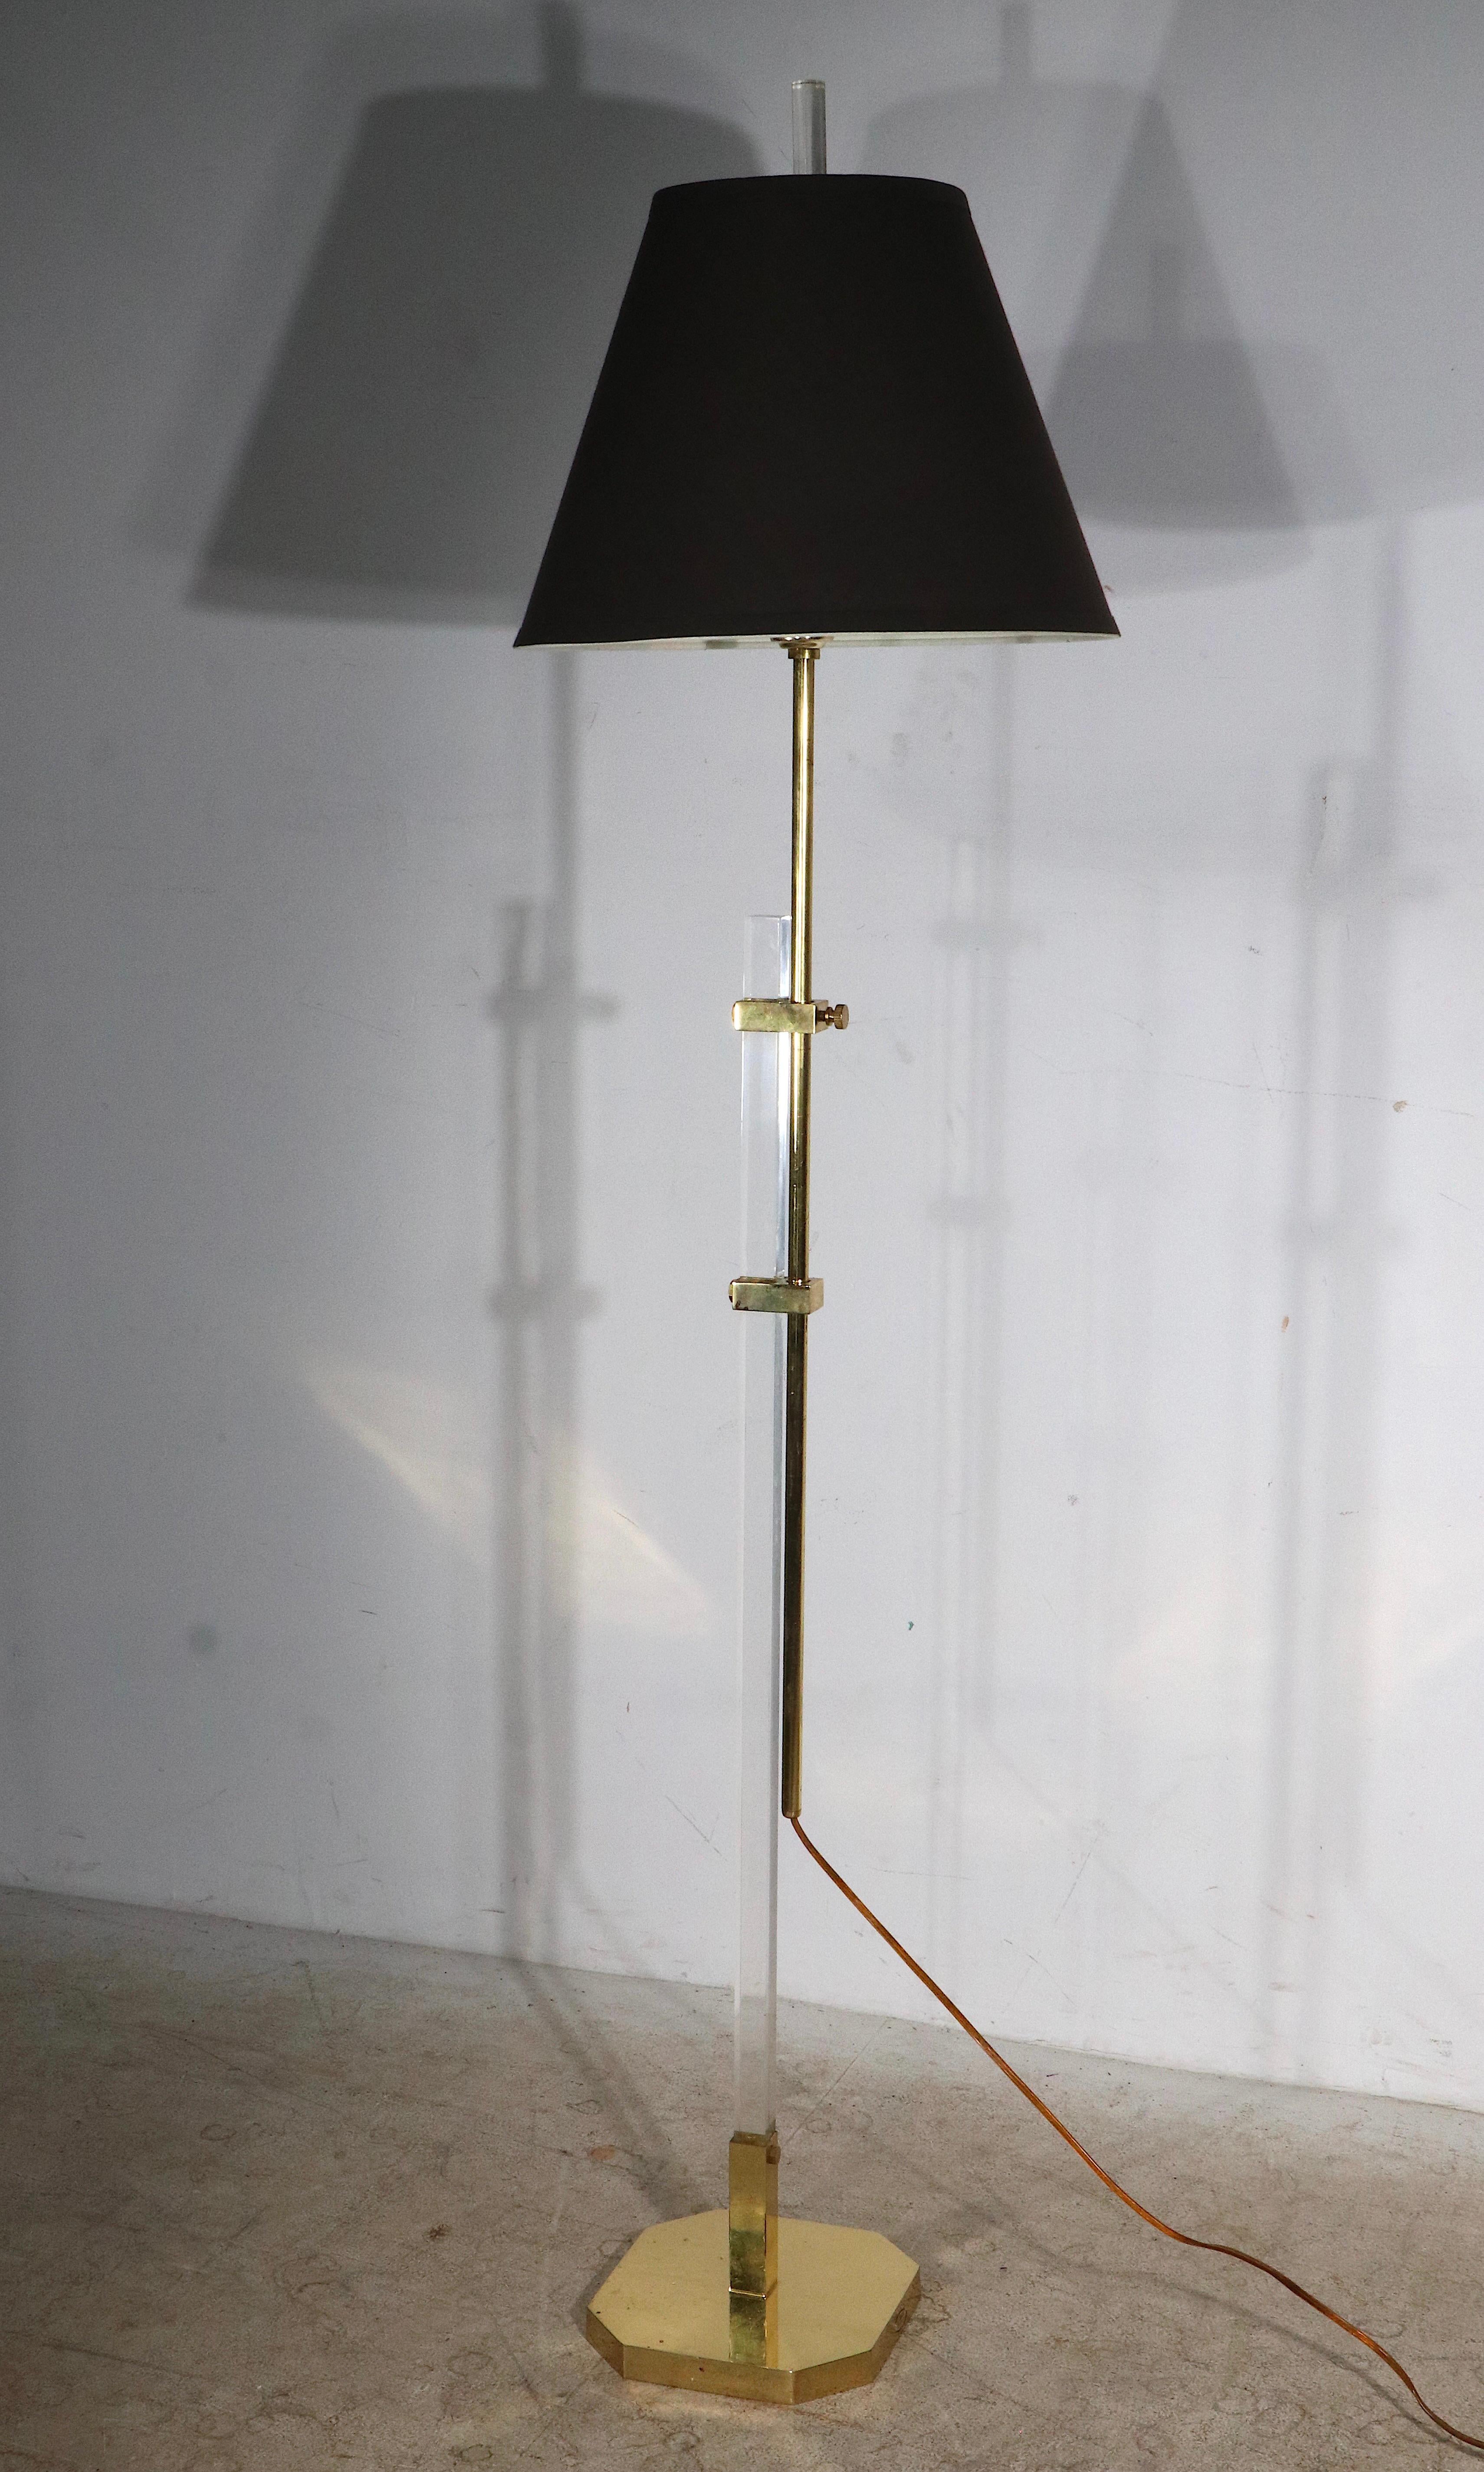  Adjustable Hollywood Regency Style Brass and Lucite Floor Lamp c. 1970/1980's For Sale 3